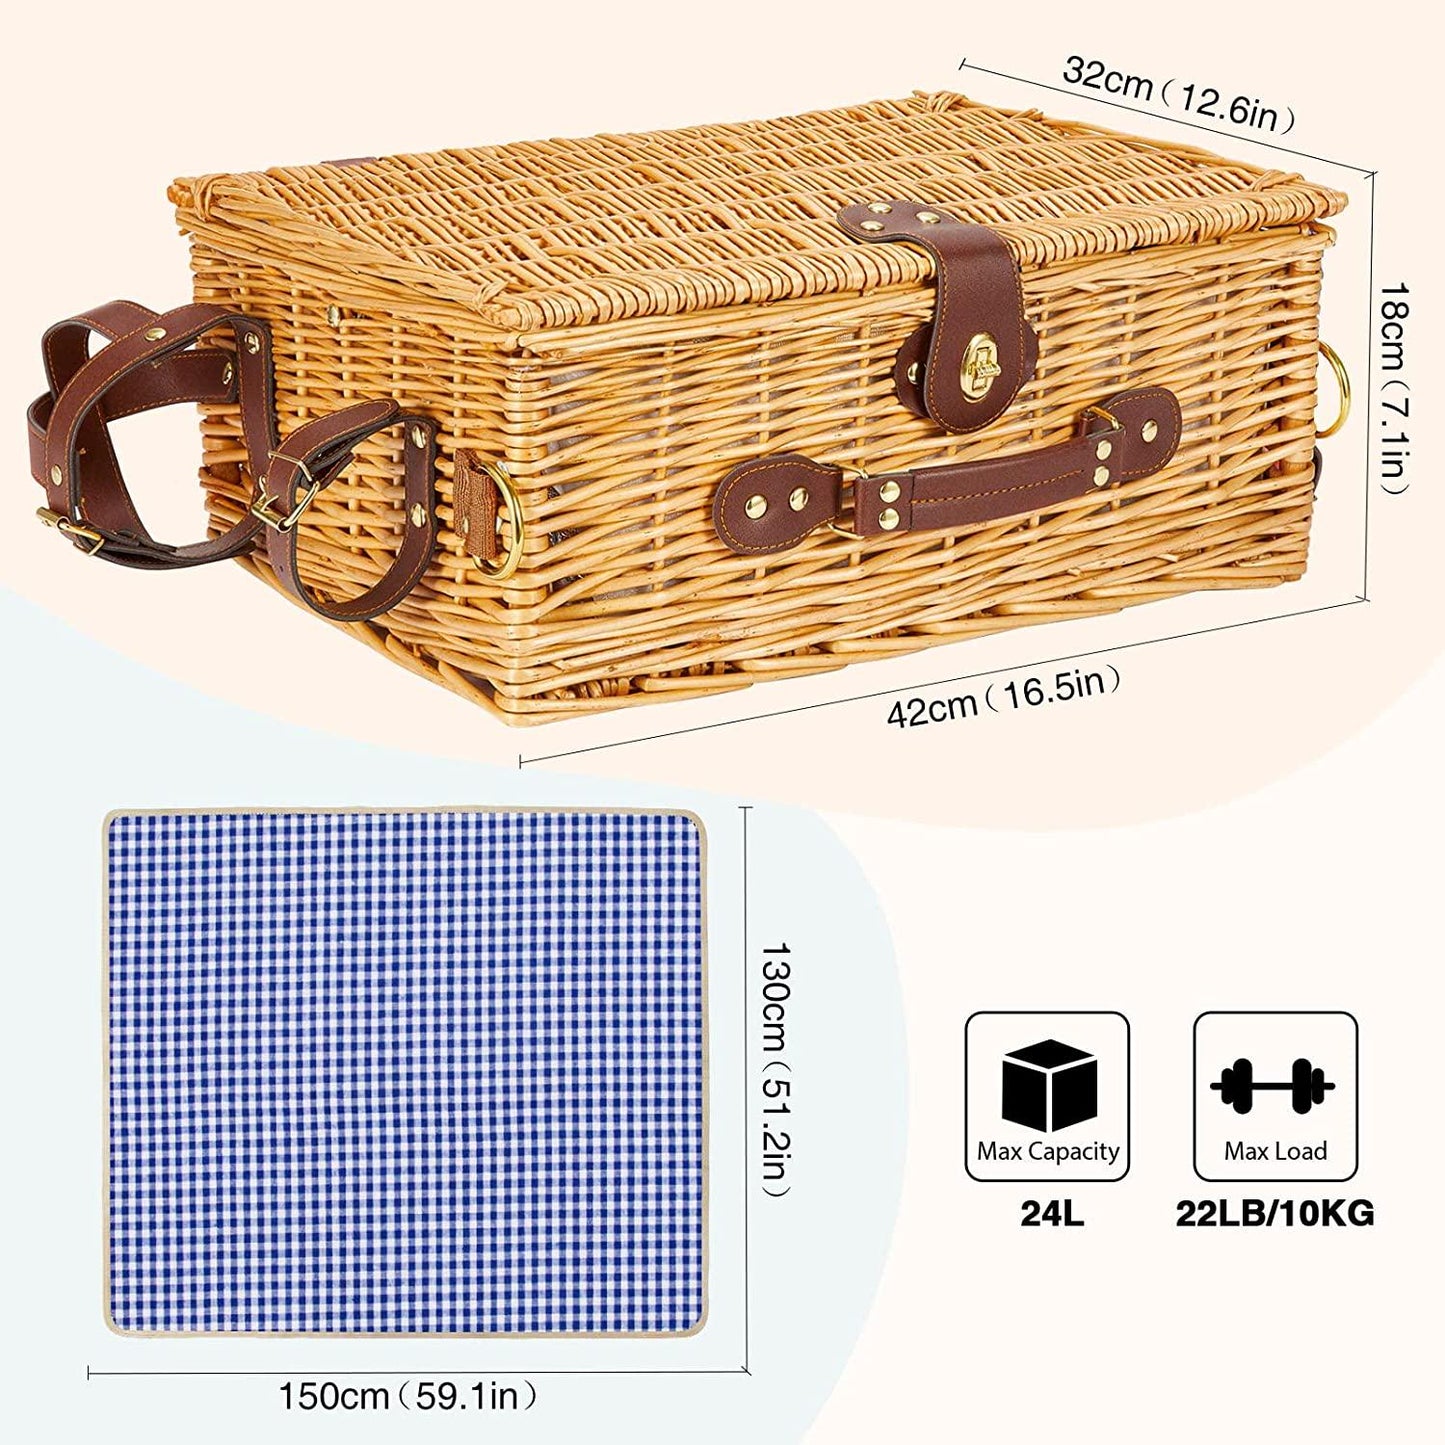 Greenstell Wicker Picnic Basket Sets for 4 Persons with High Sealing Insulation Layer,Waterproof Picnic Mat, Removable Strap and Wine Bag